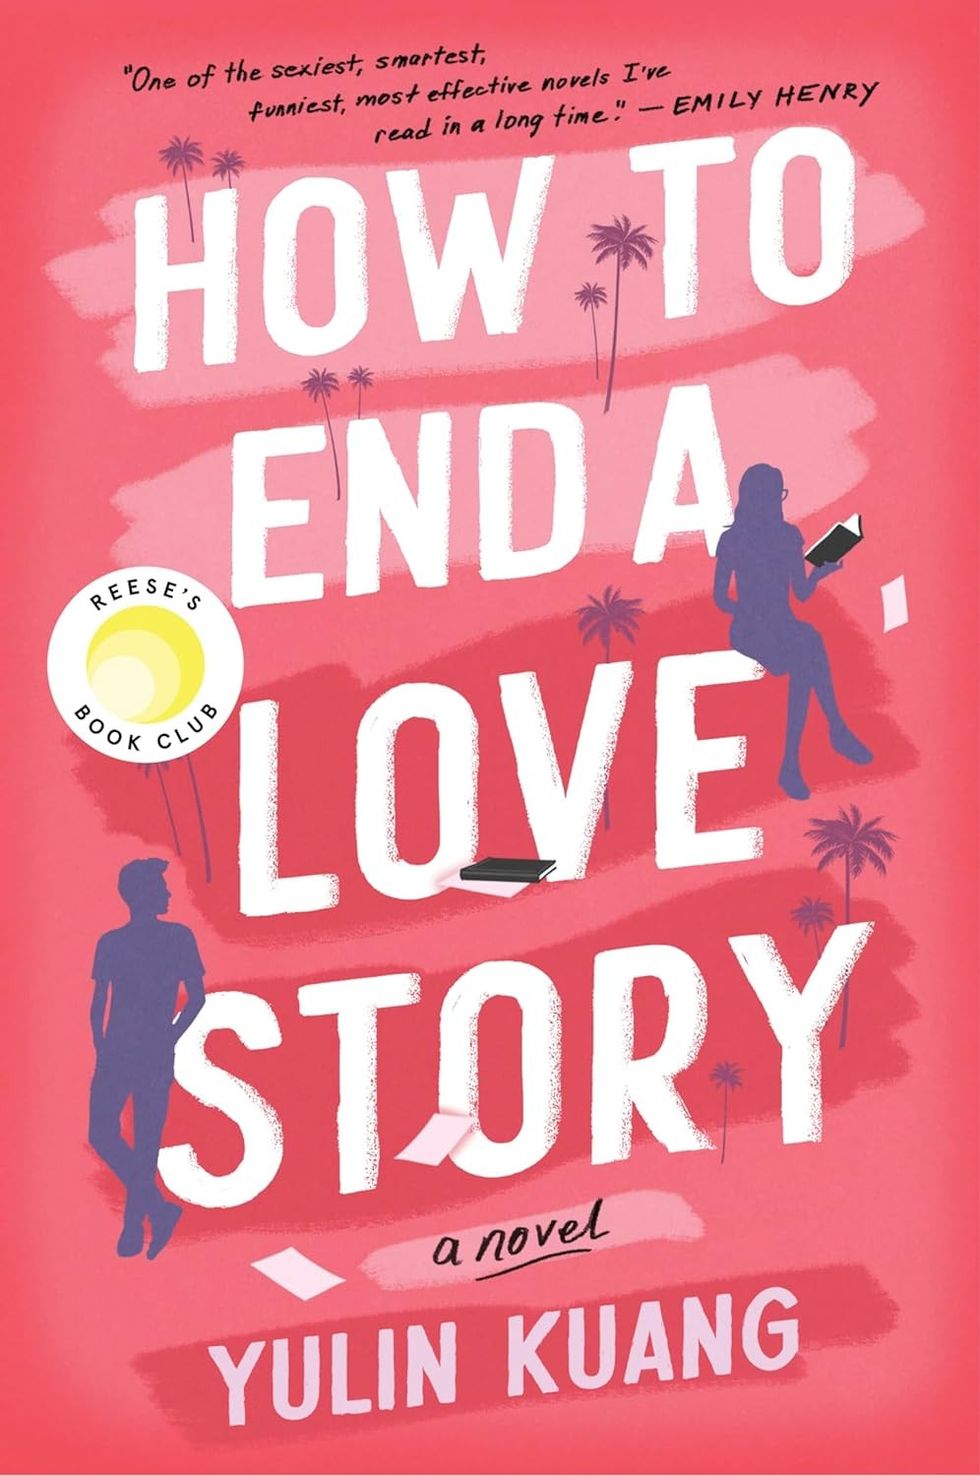 \u200bHow to End a Love Story by Yulin Kuang